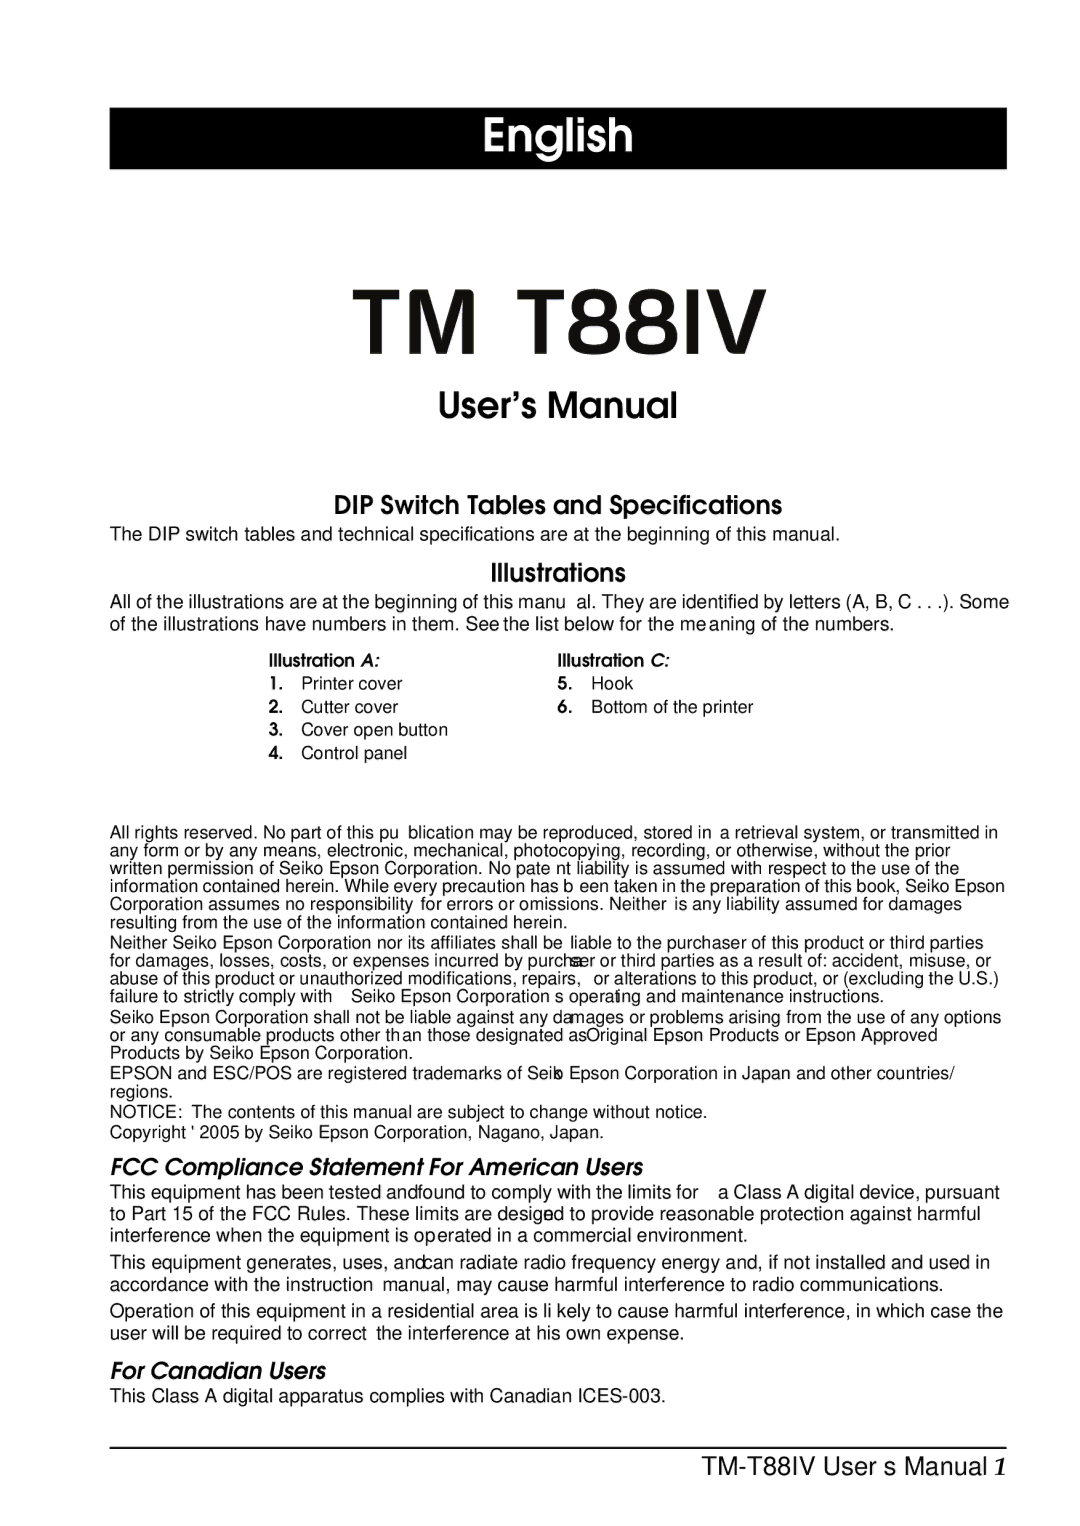 Epson T88IV user manual English, User’s Manual, DIP Switch Tables and Specifications, Illustrations 